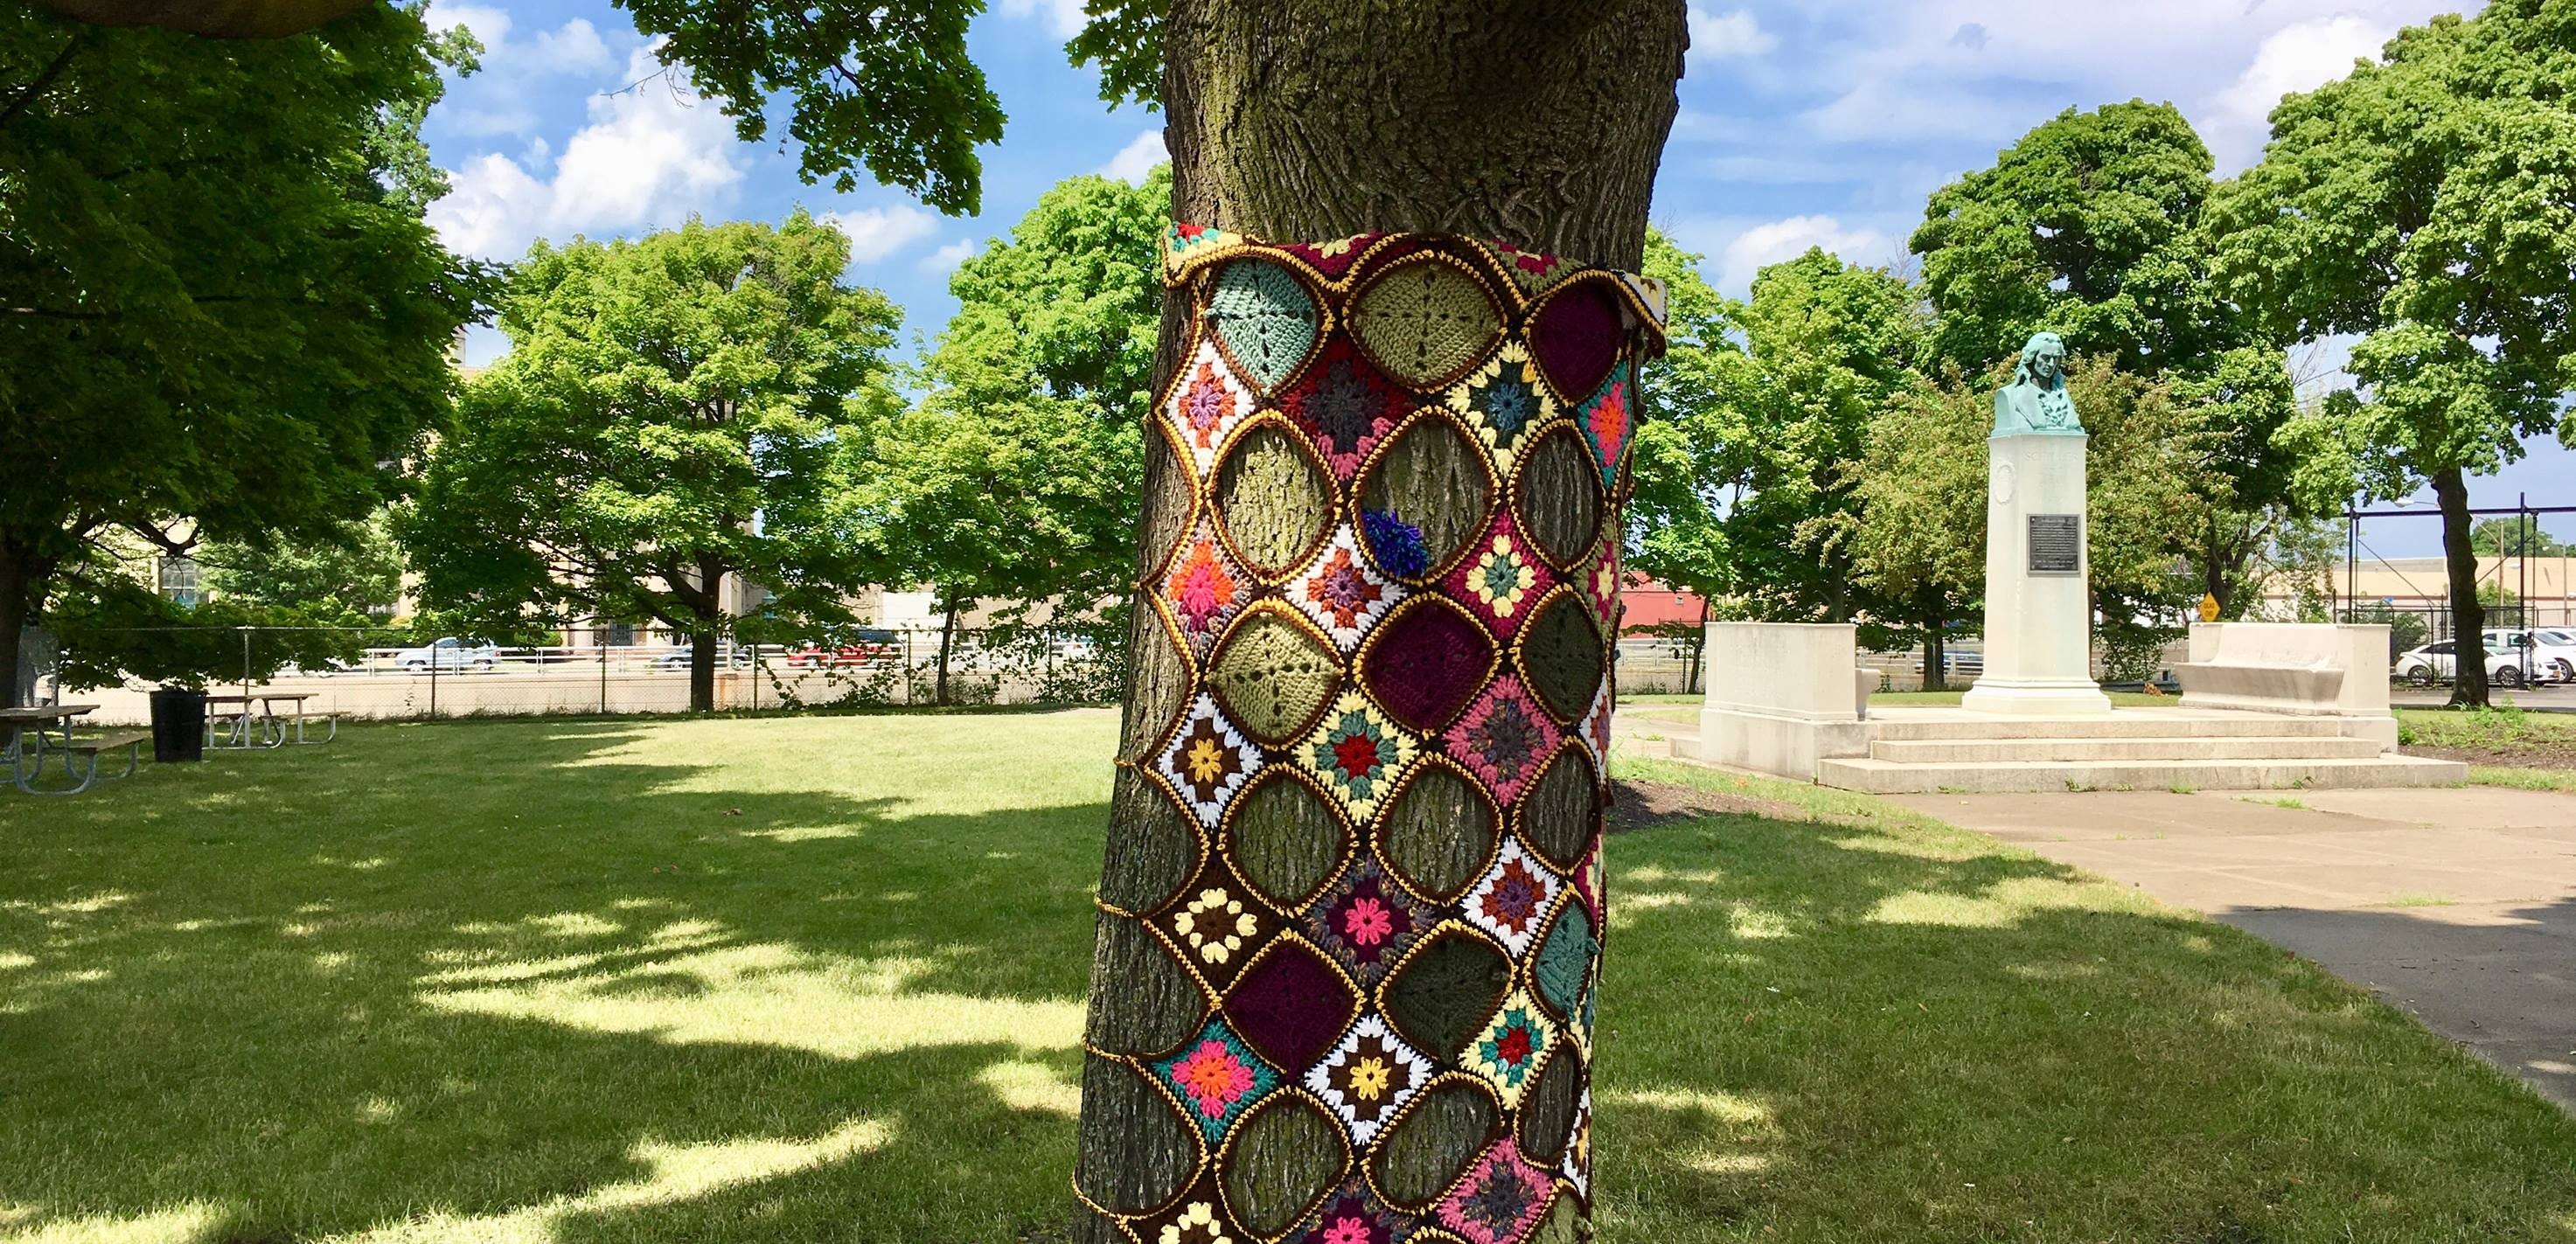 Verbal agreement over yarn-art project unravels in Rochester